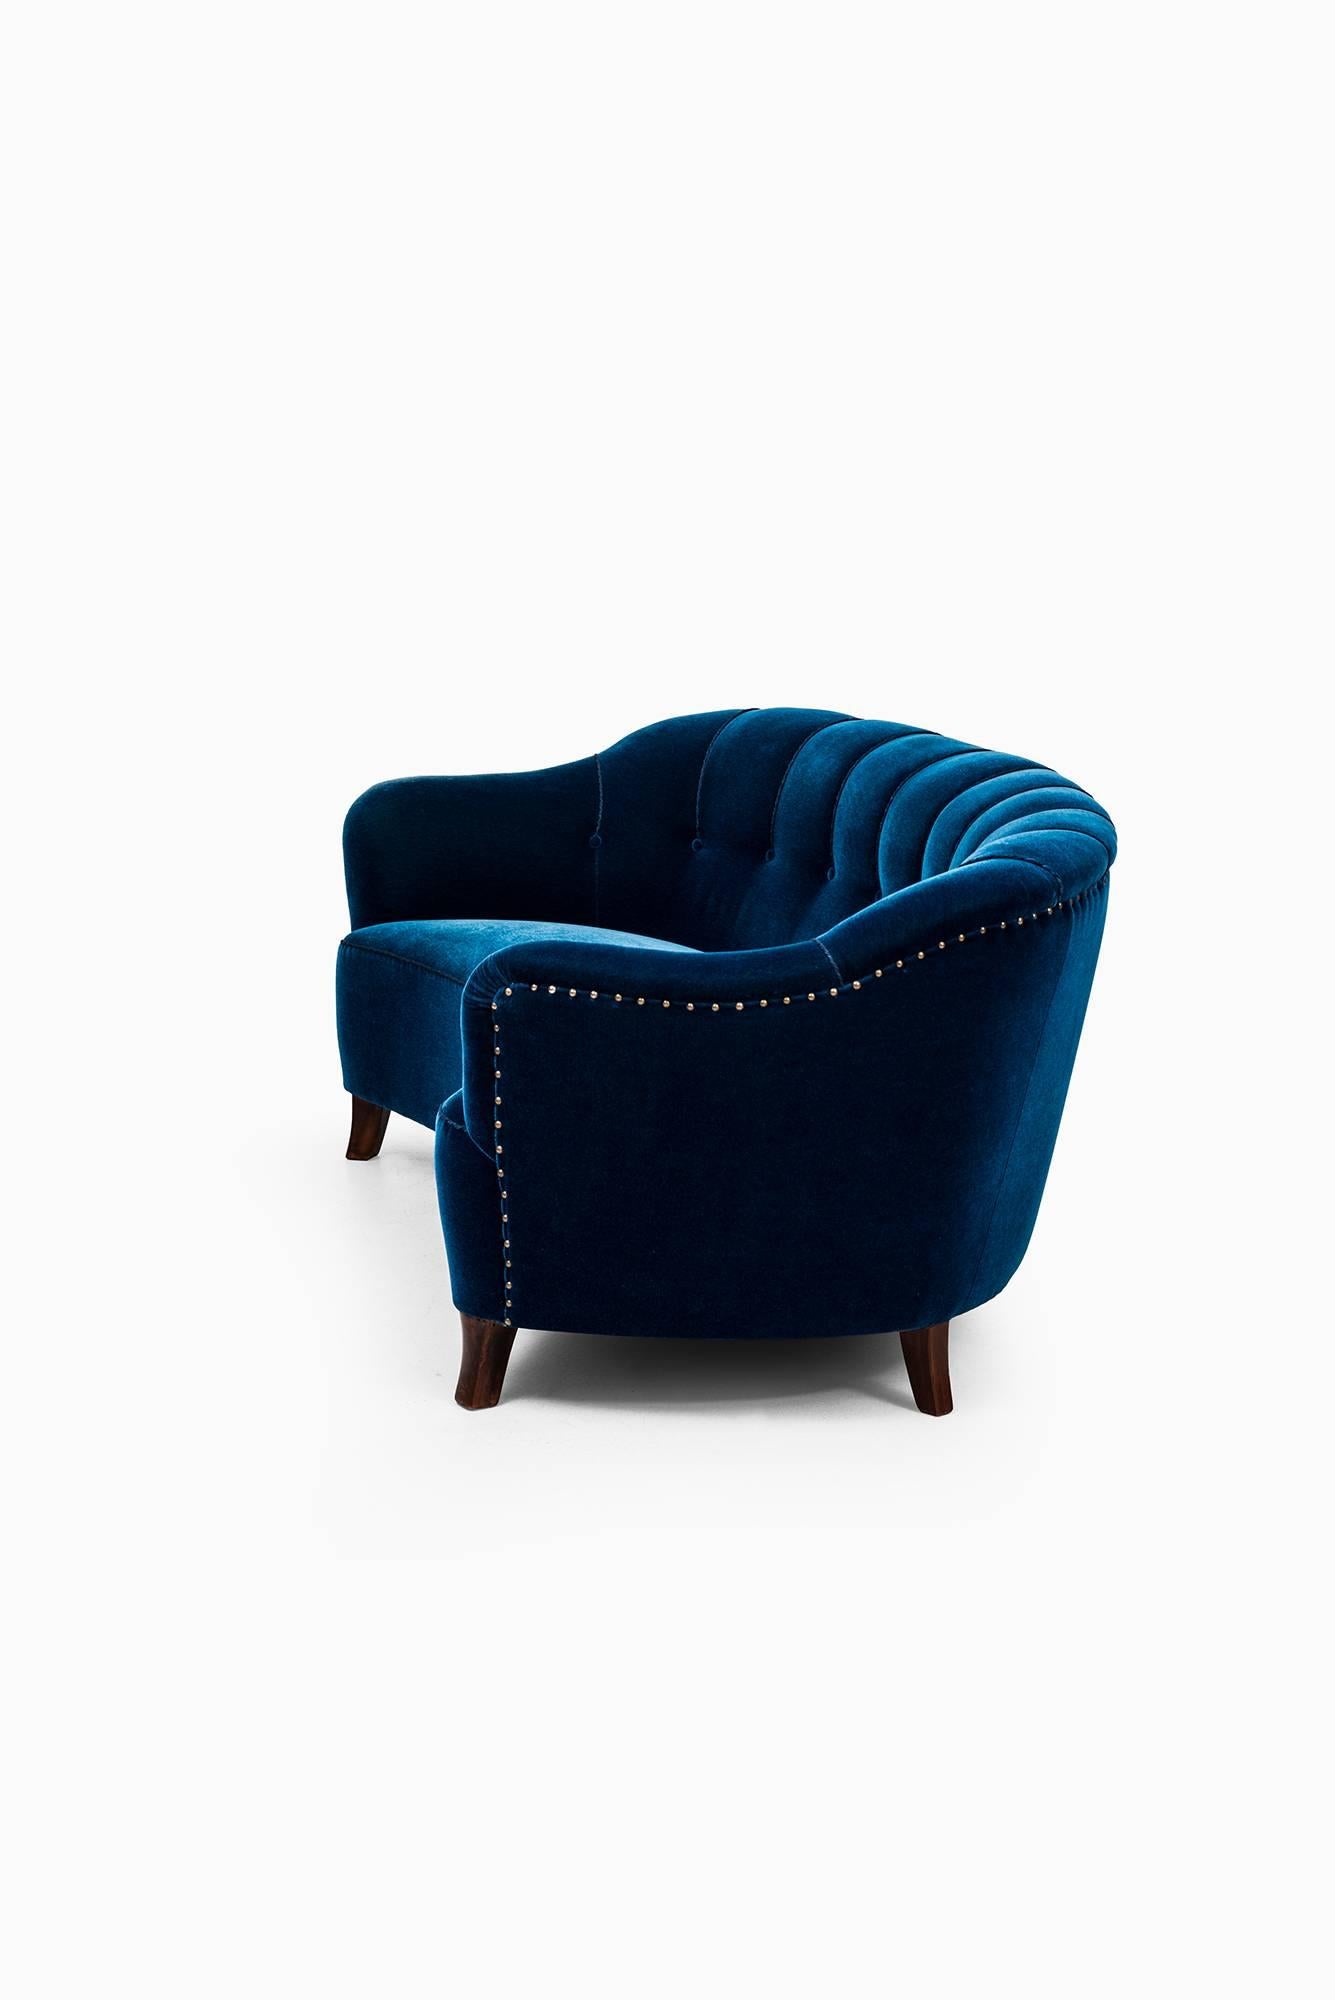 Swedish Curved Sofa in Blue Velvet Attributed to Otto Schulz